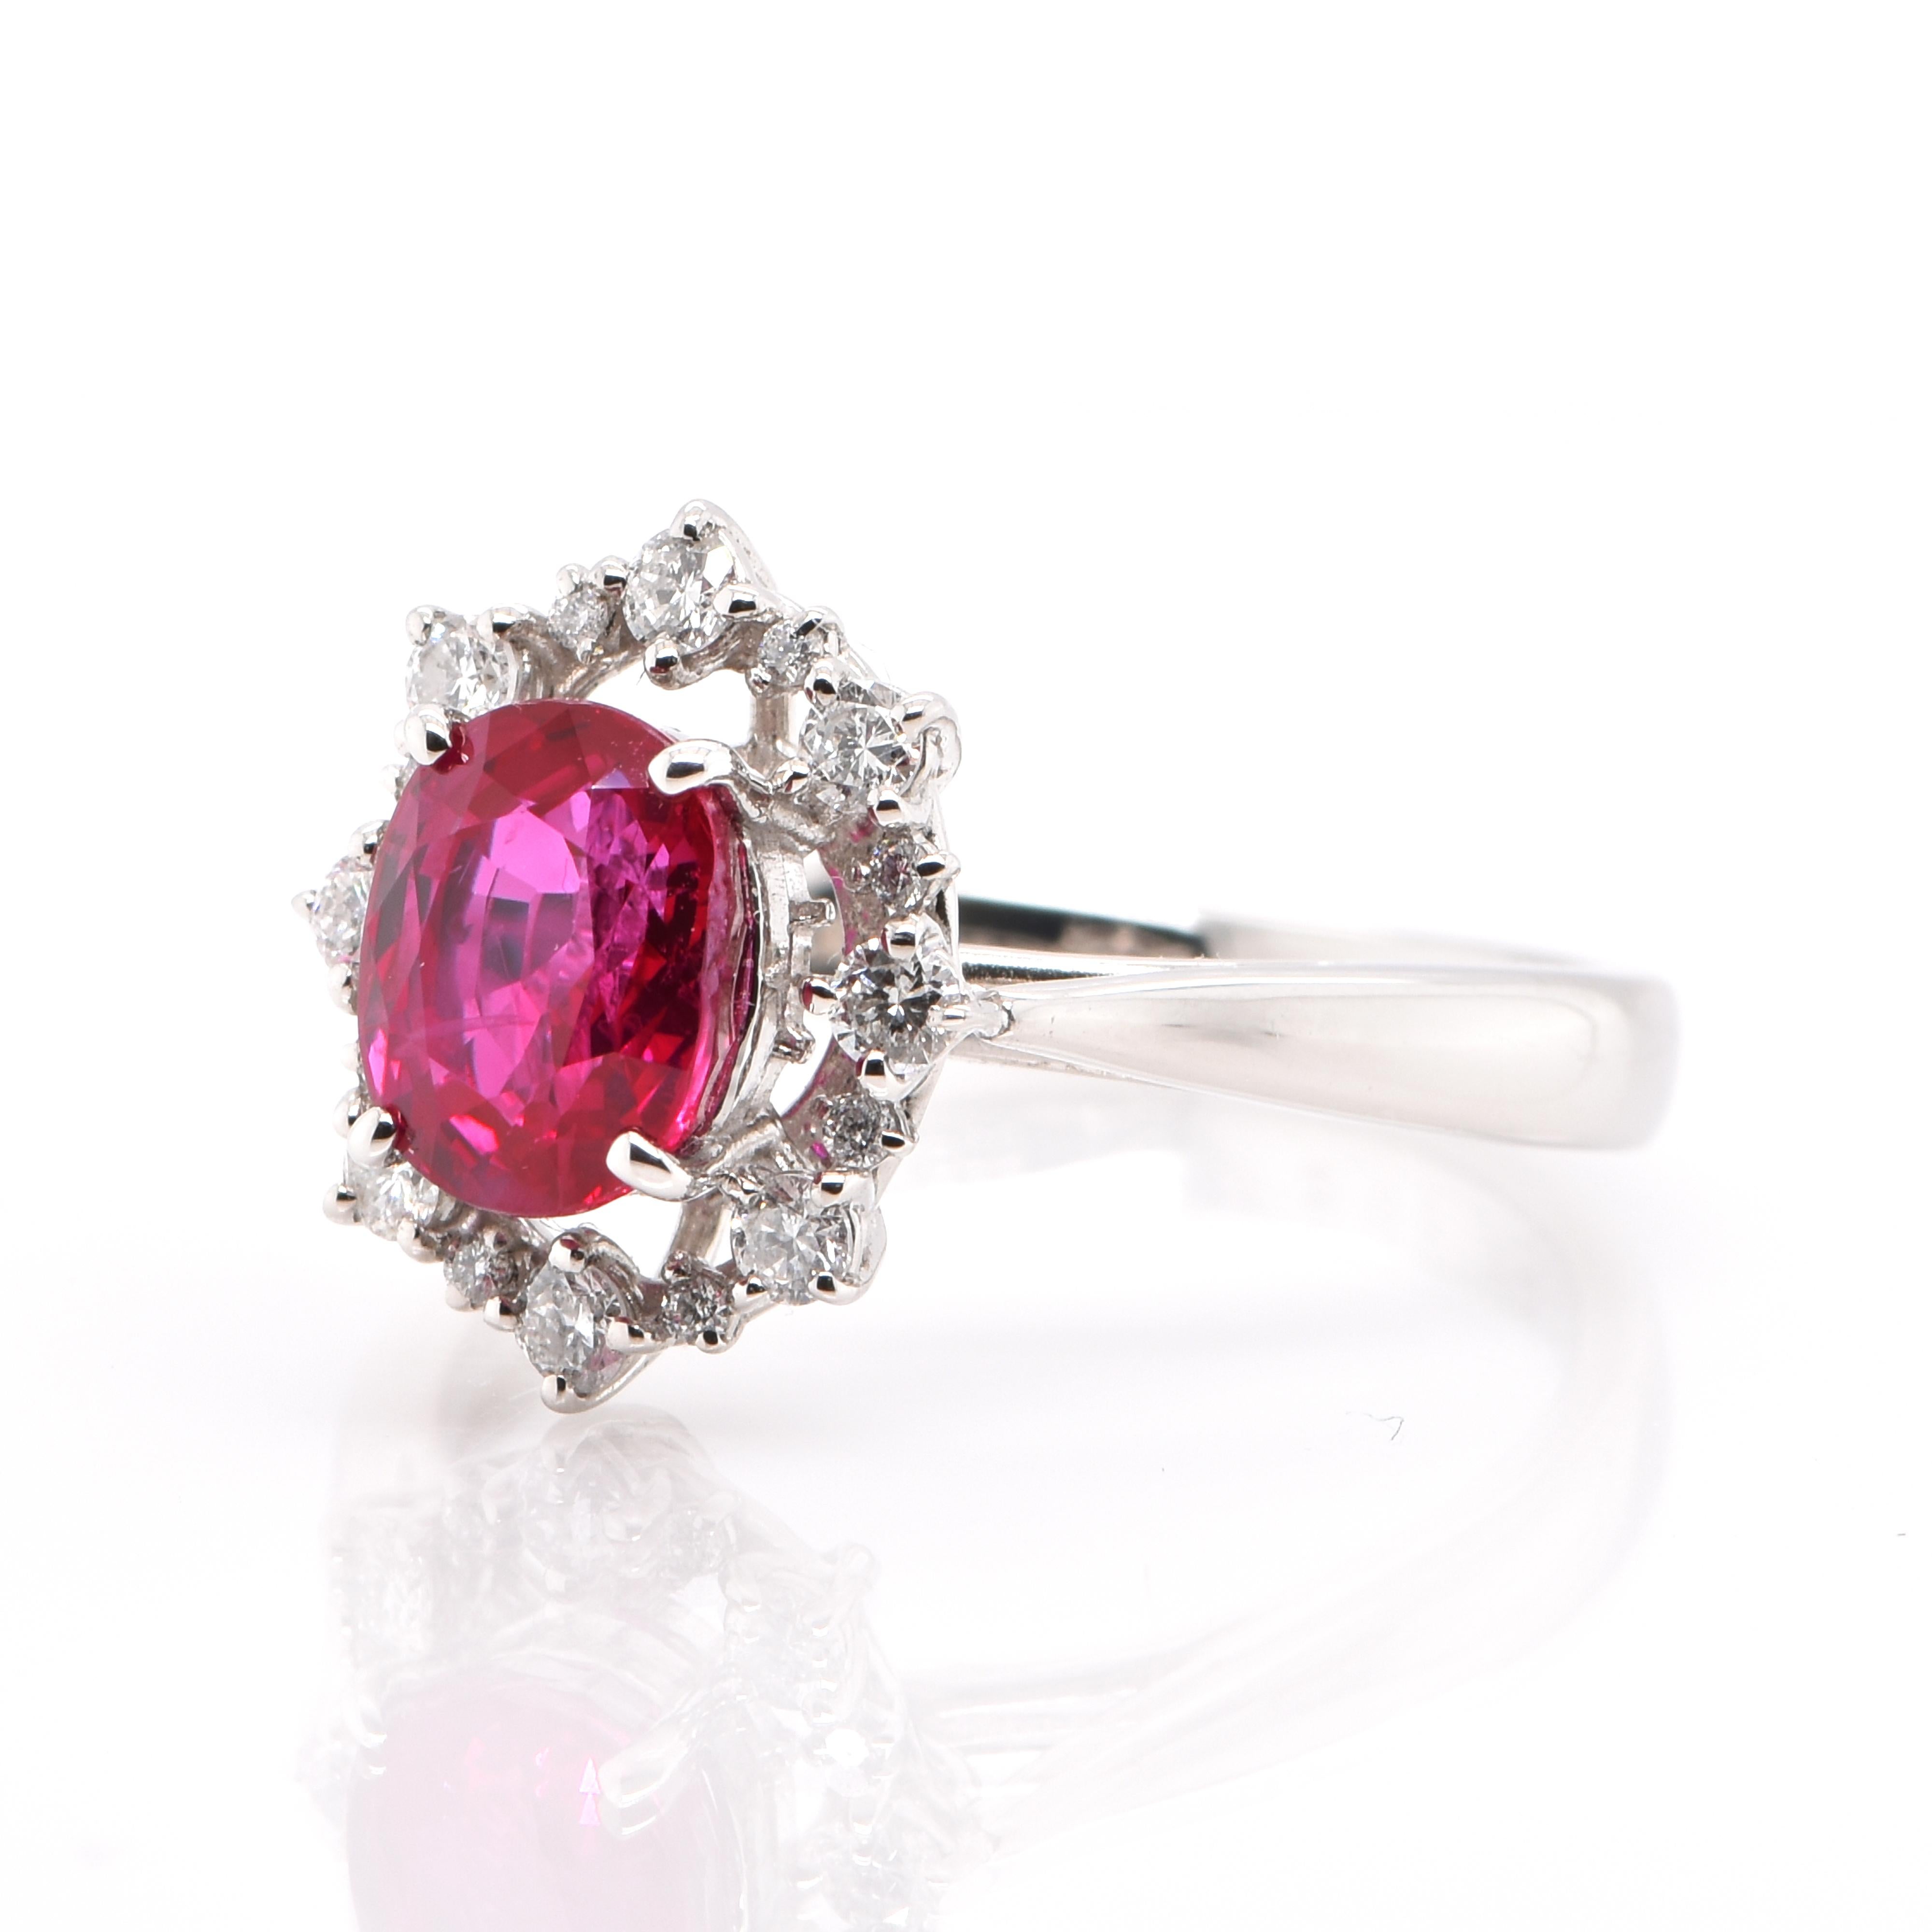 A beautiful Engagement Ring featuring a 2.01 Carat, GIA Certified, Natural, Burmese Heated Ruby and 0.29 Carats of Round Brilliant Diamond Accents set in Platinum. Rubies are referred to as 